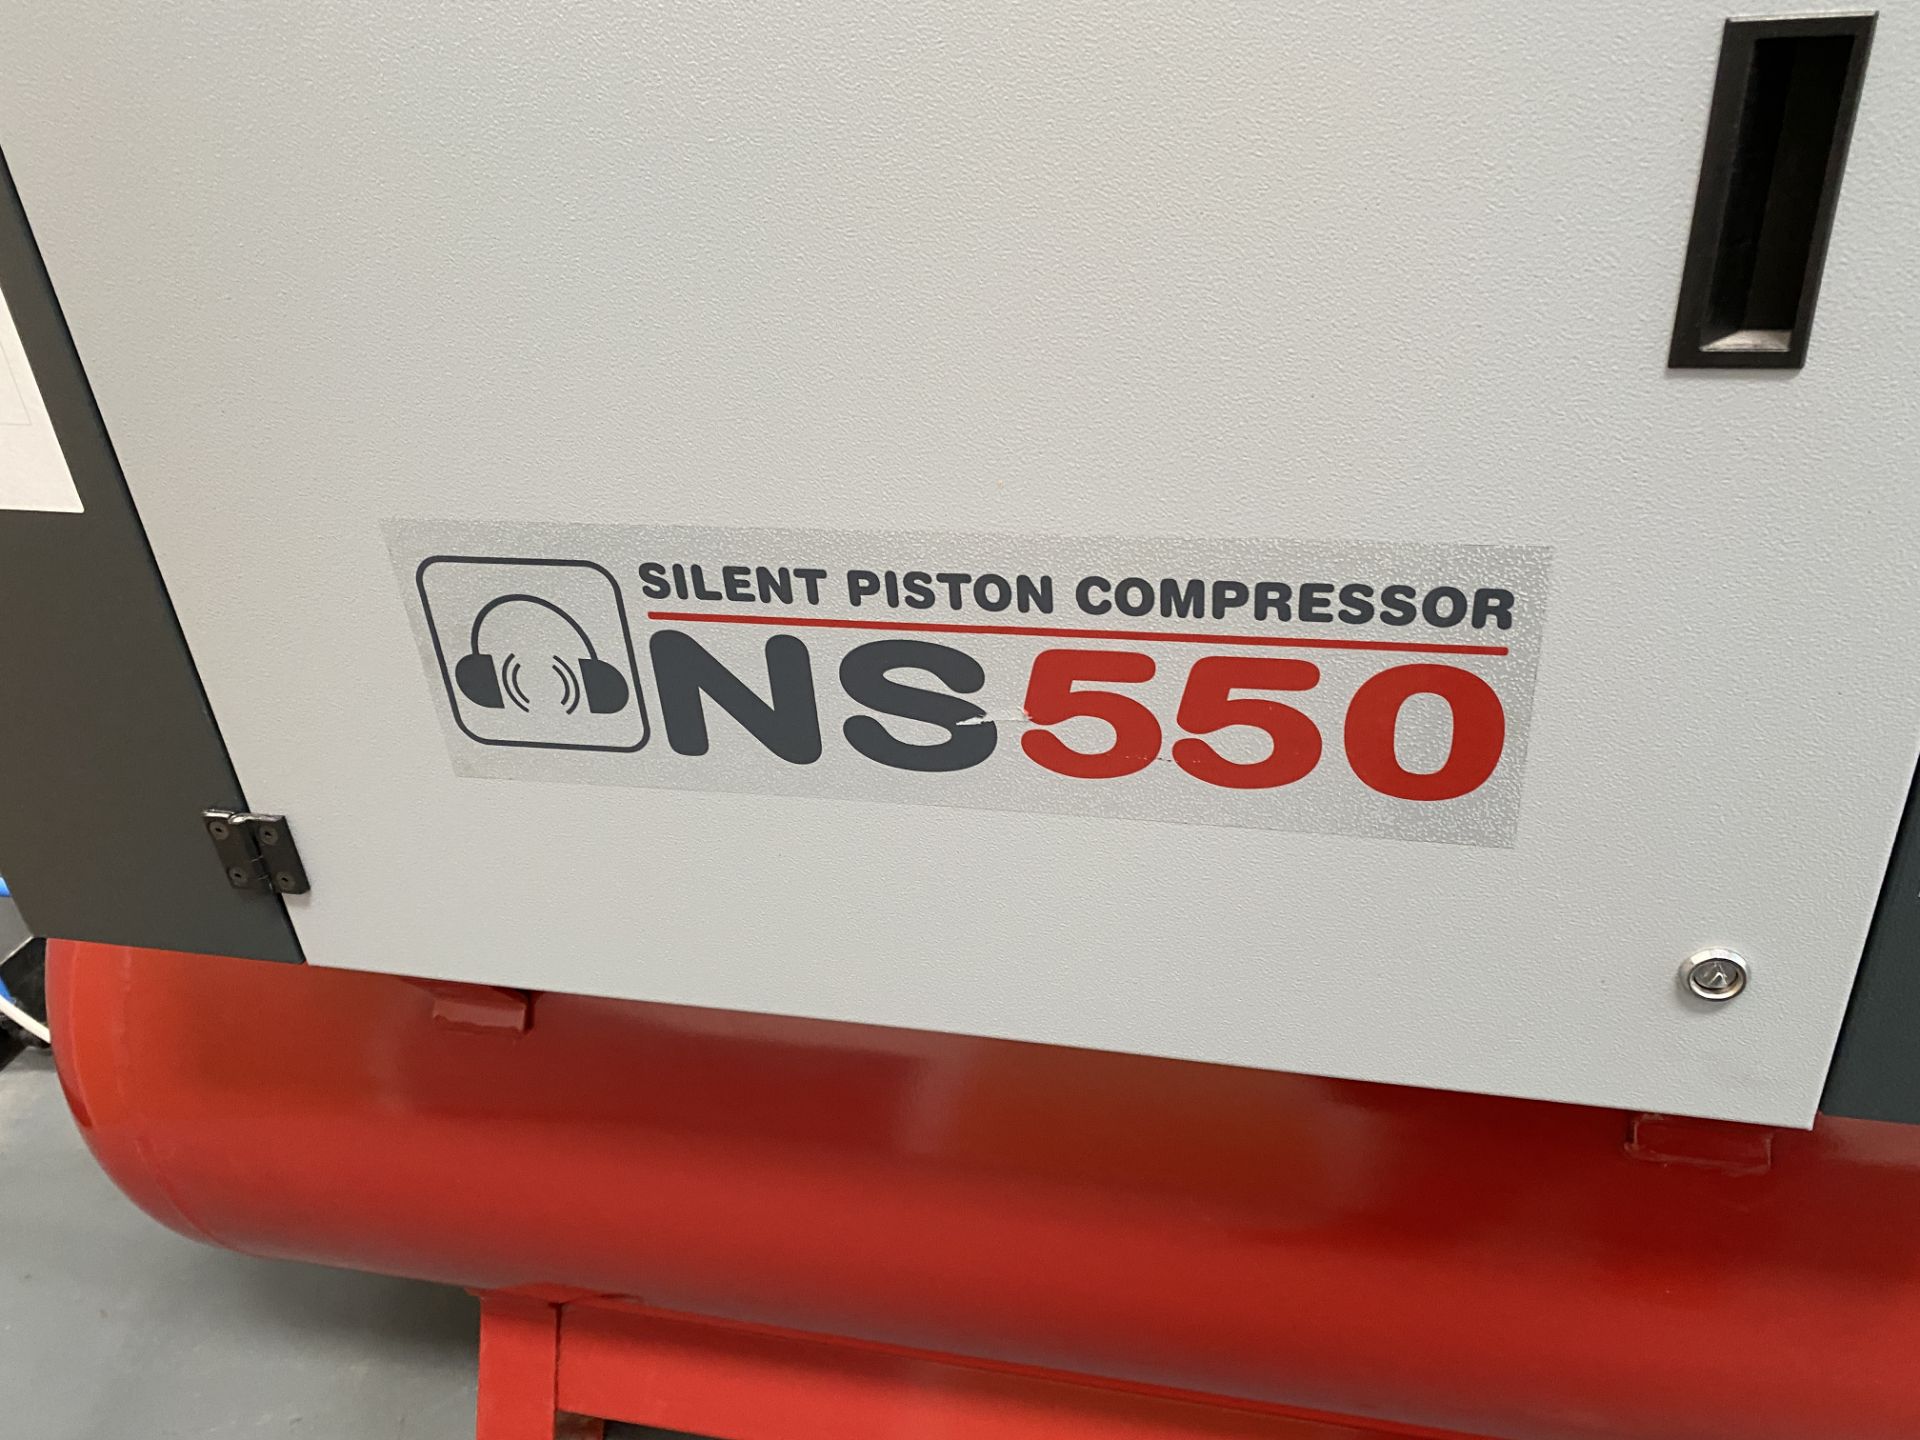 SWP Aria Model NS 550, LN55/270 Silent Piston Receiver Mounted Compressor, Serial No. 97254197/ - Image 6 of 13